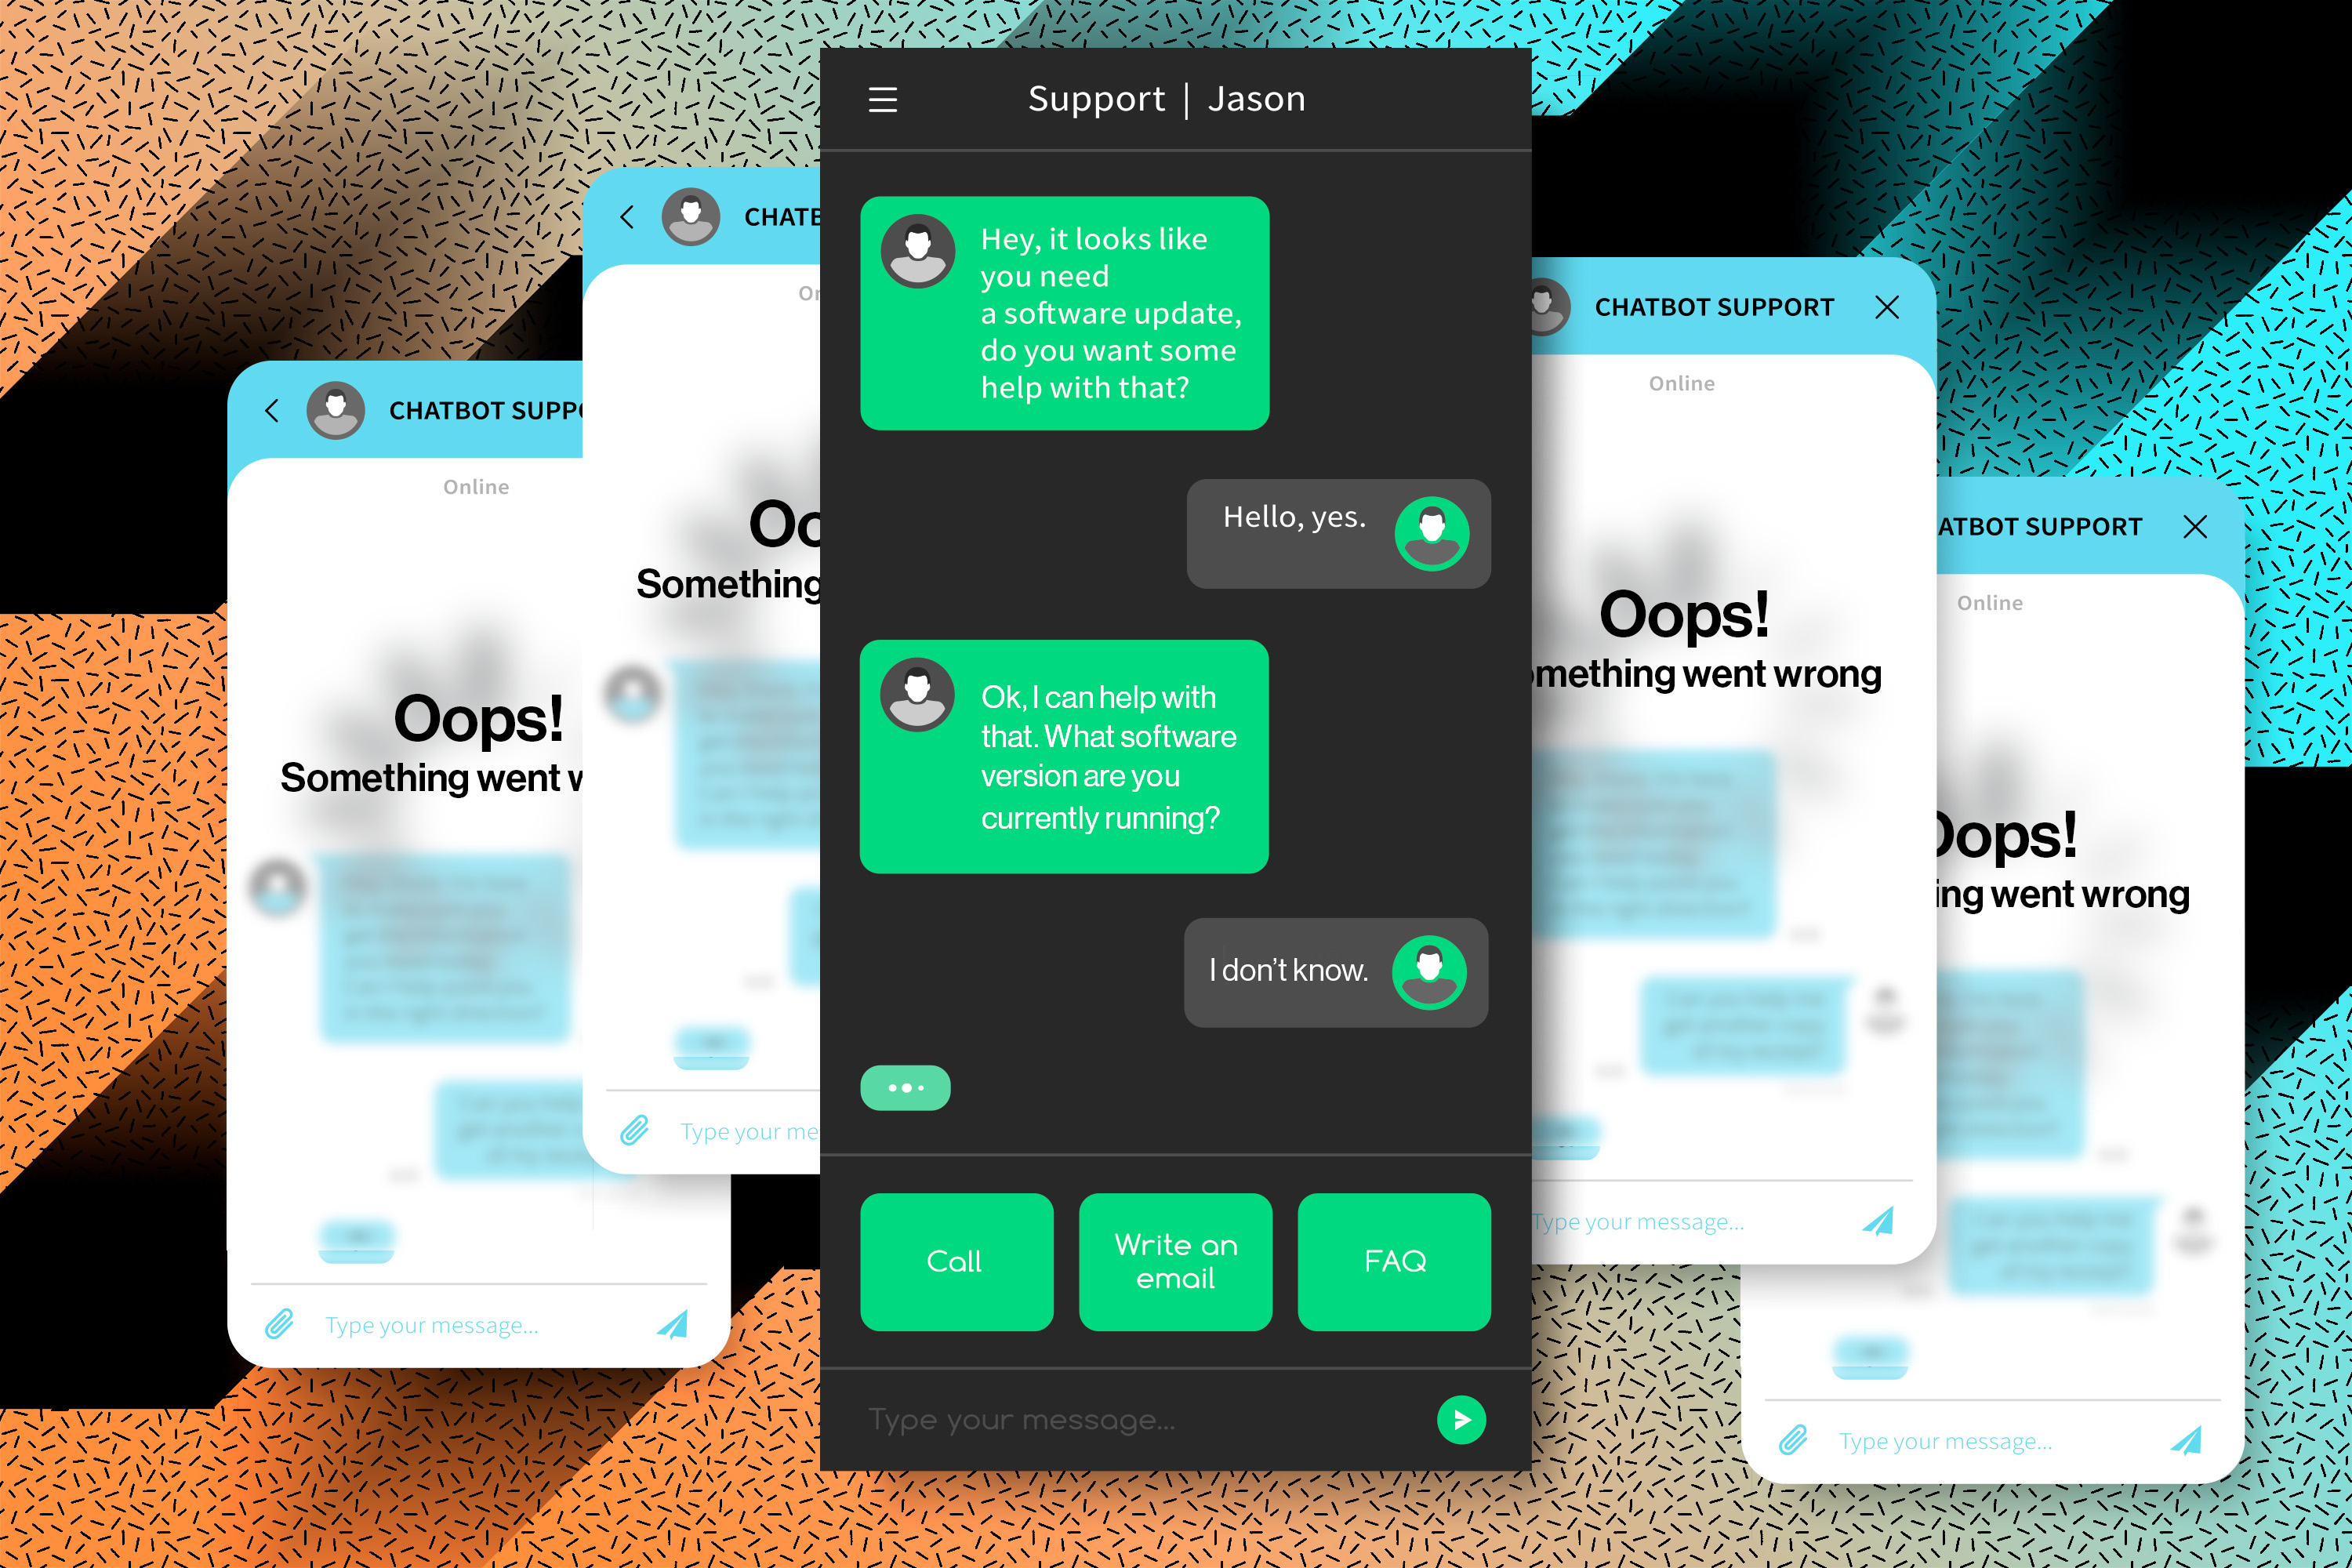 A New Way To Let Ai Chatbots Converse All Day Without Crashing image courtesy news.mit.edu